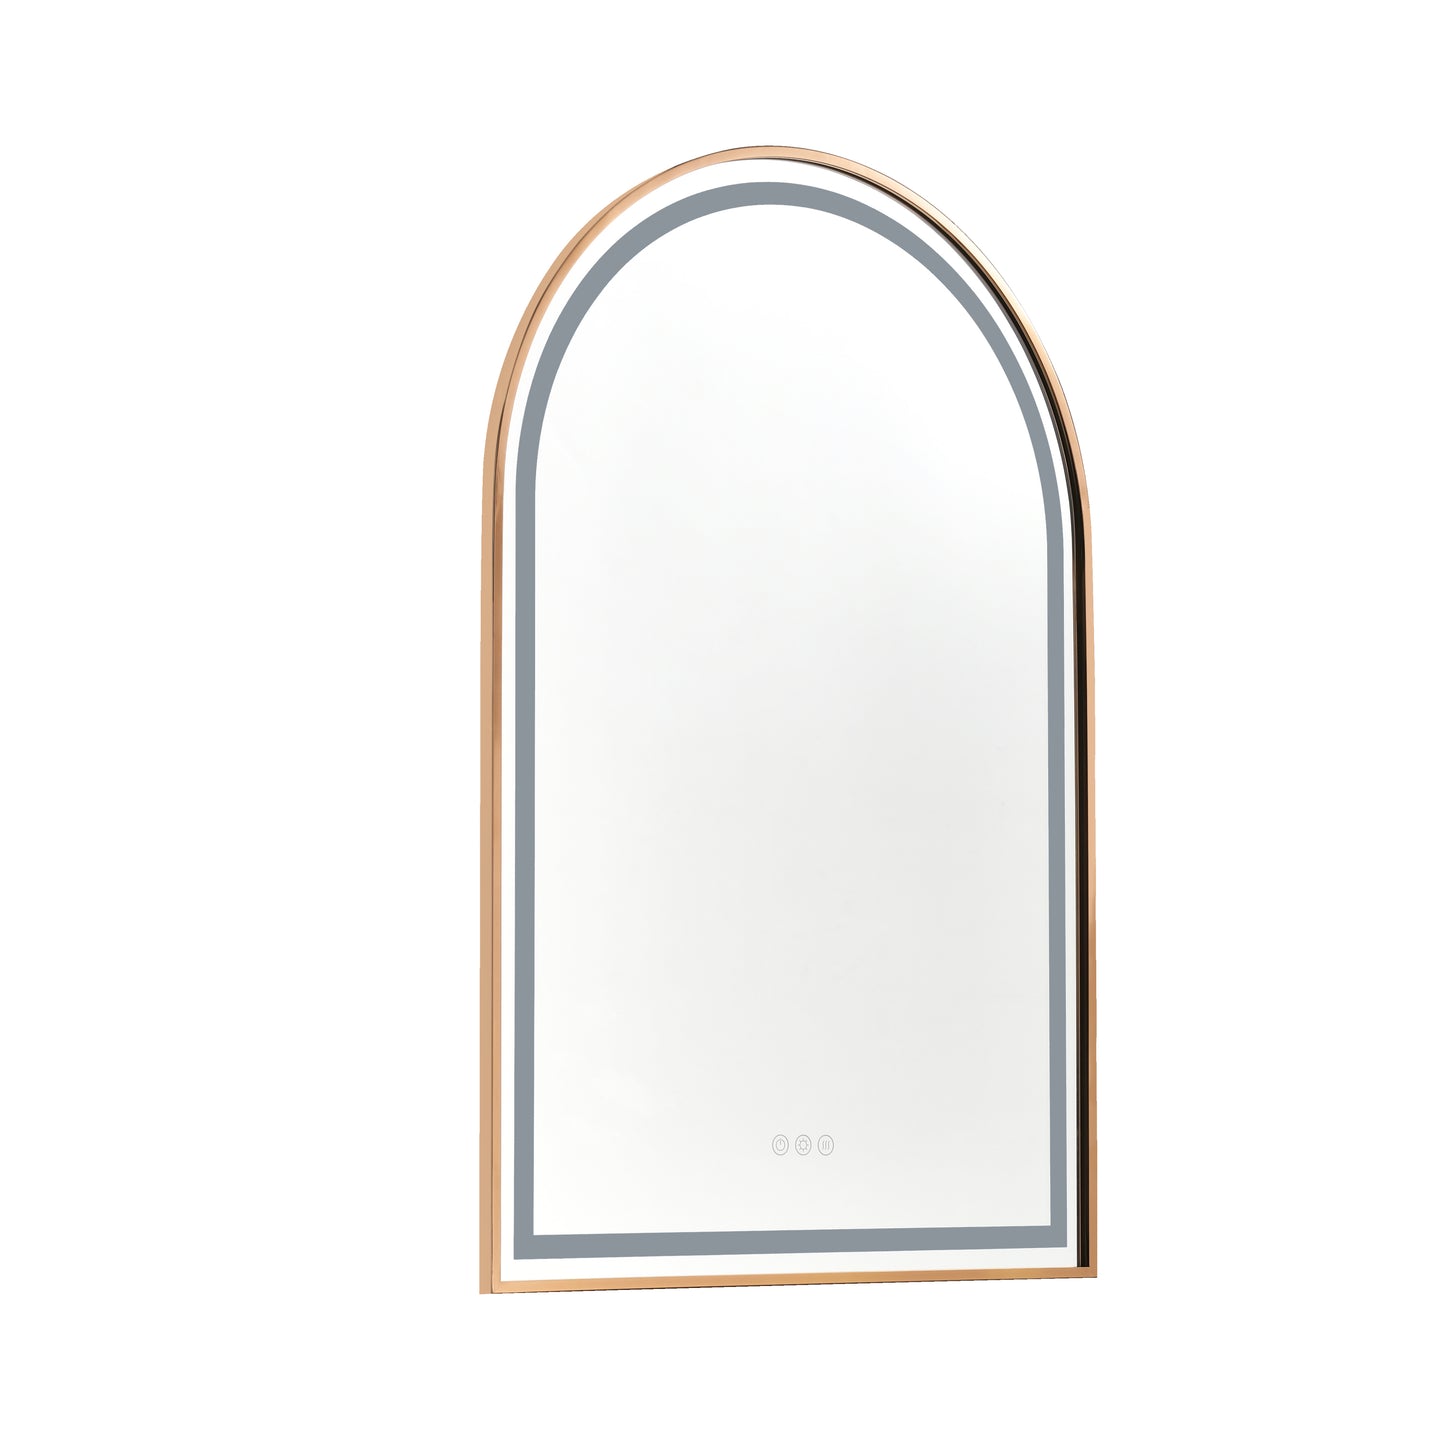 39in. W x 26in. H Oversized Rectangular Rose Gold Framed LED Mirror Anti-Fog Dimmable Wall Mount Bathroom Vanity Mirror Rose Gold